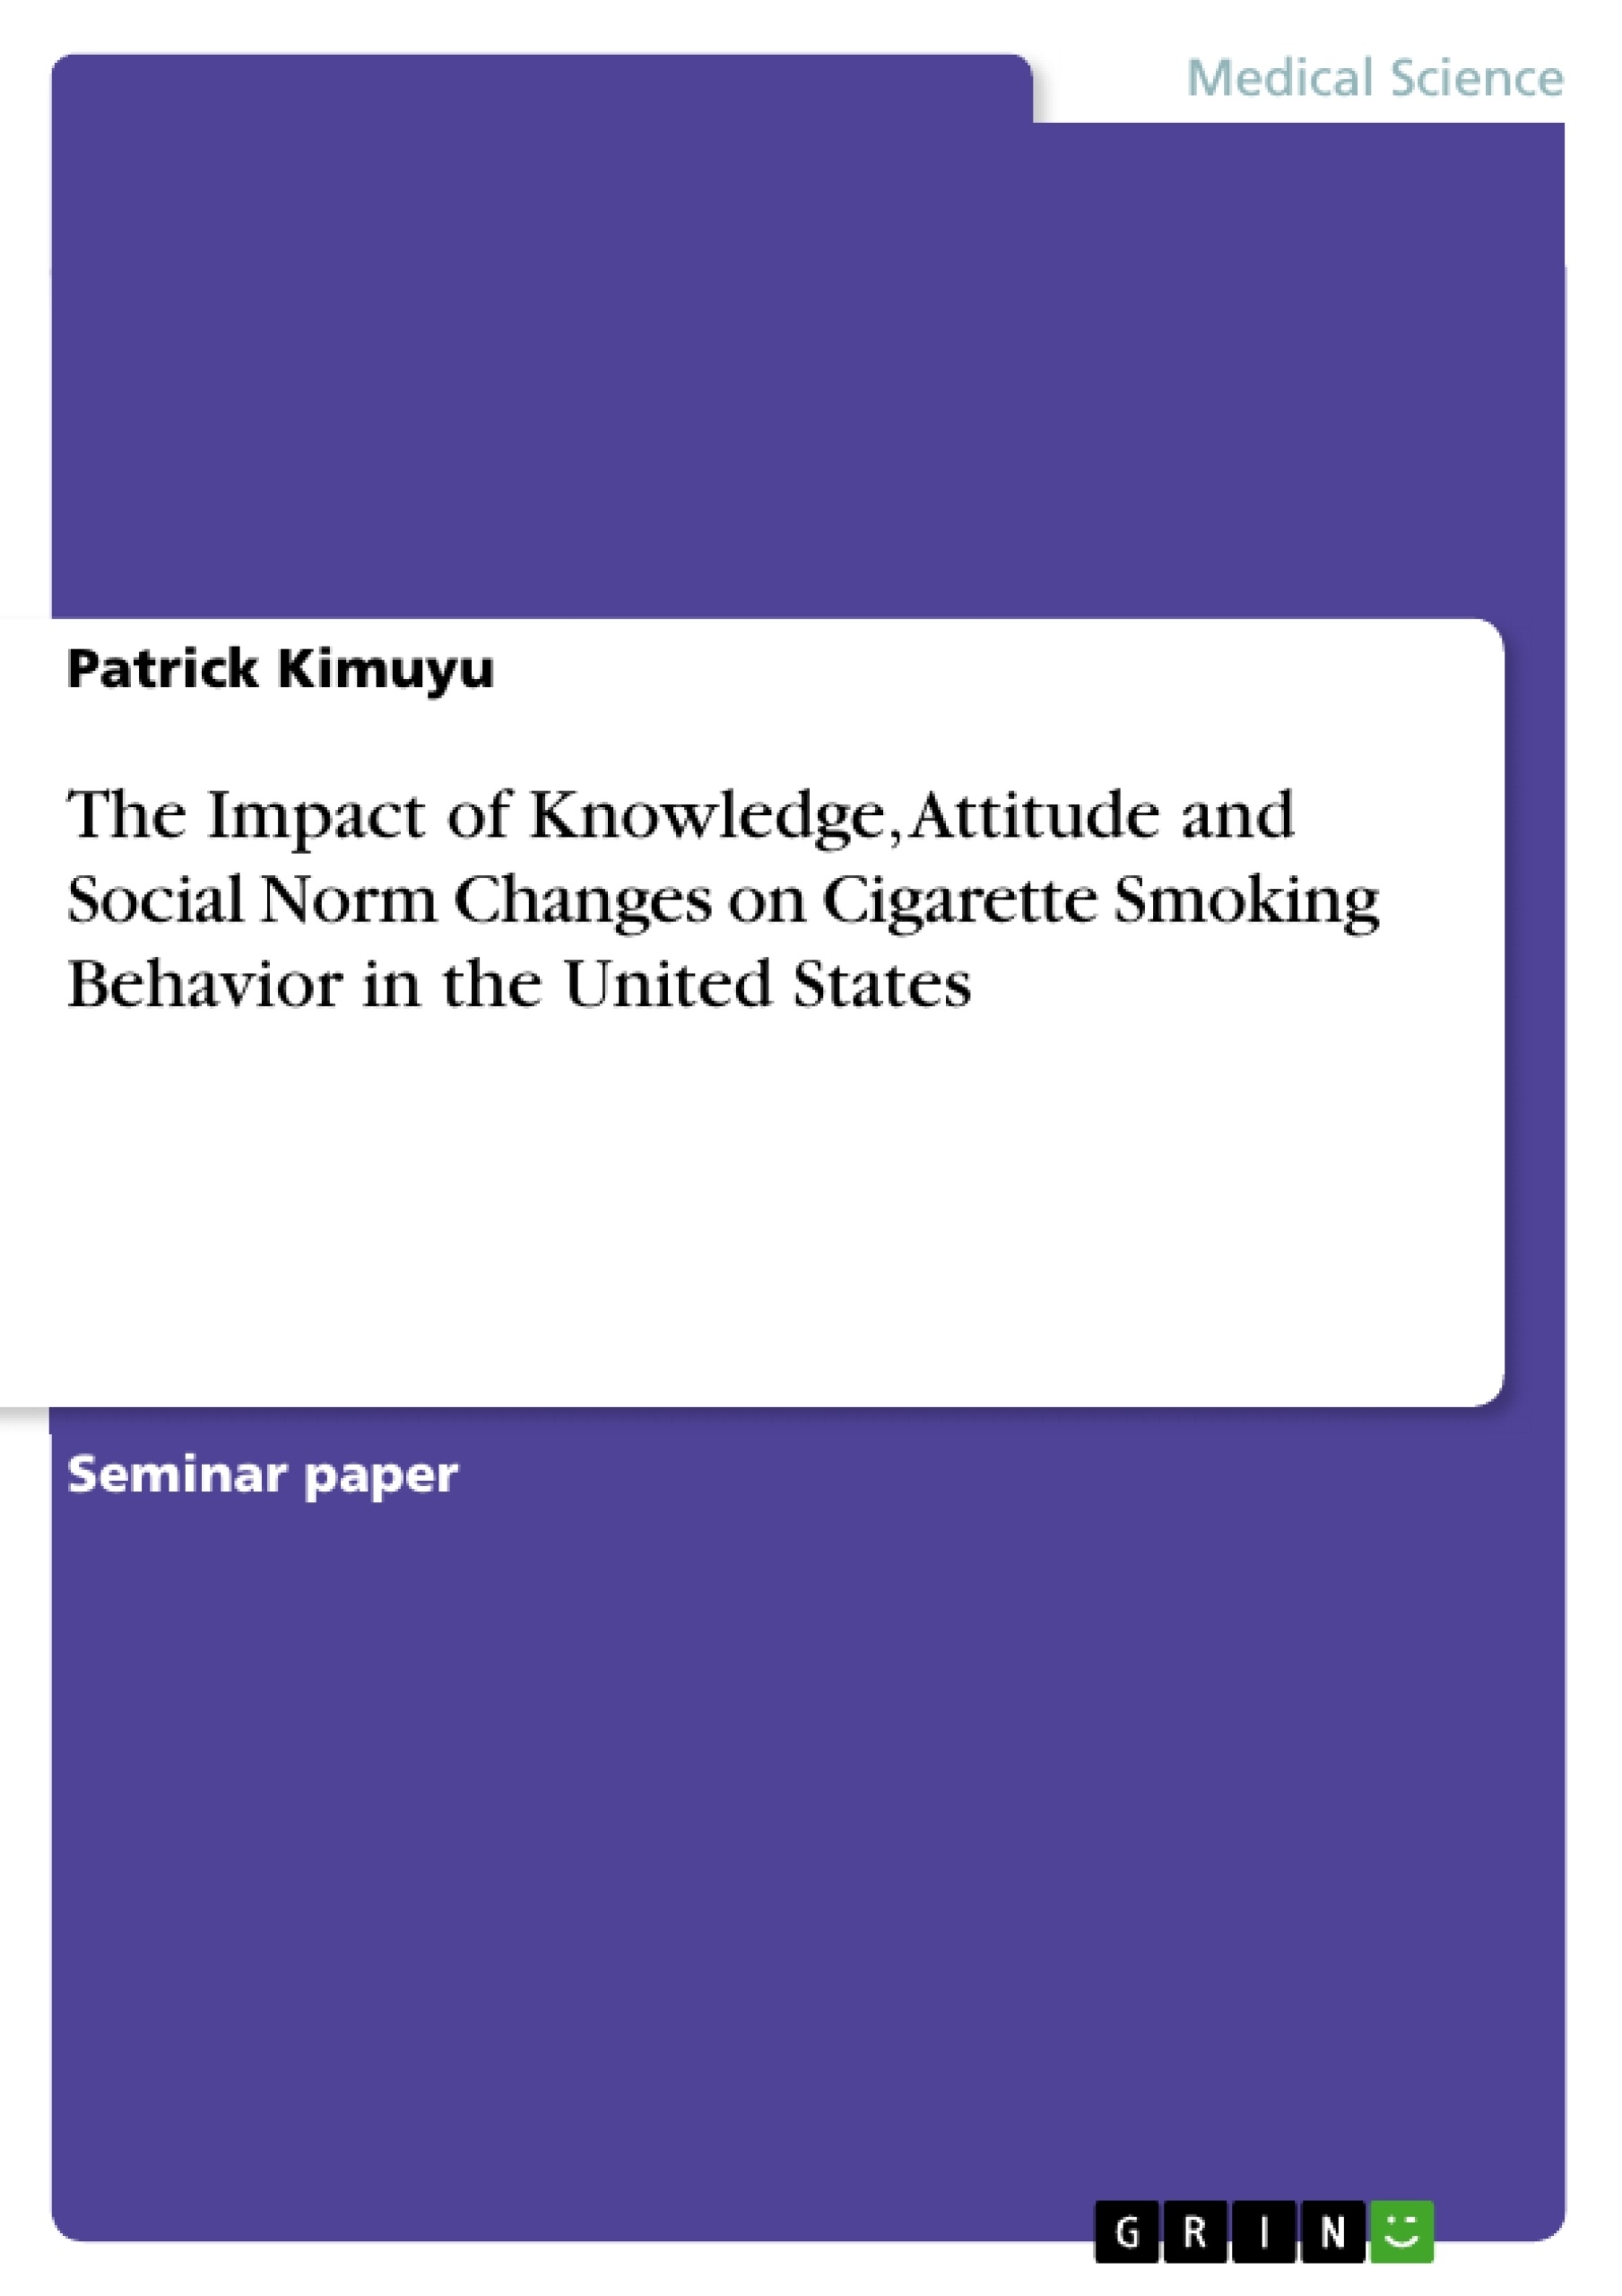 Title: The Impact of Knowledge, Attitude and Social Norm Changes on Cigarette Smoking Behavior in the United States